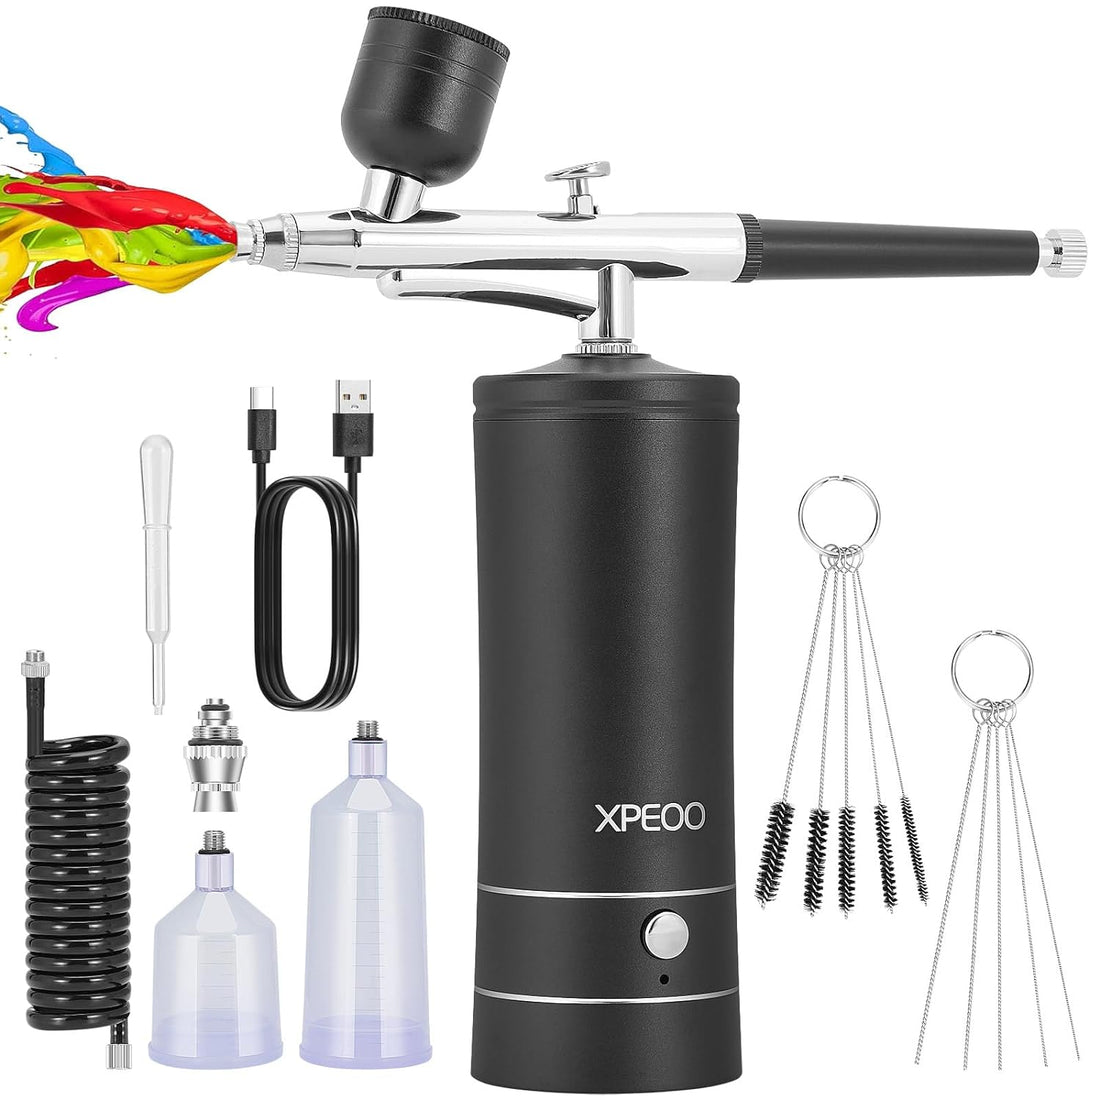 Airbrush KIT Cordless Rechargable with Compressor Portable Air Brush Sets,Auto Handled for Model Painting,Nail,Make Up,Tattoo, Black